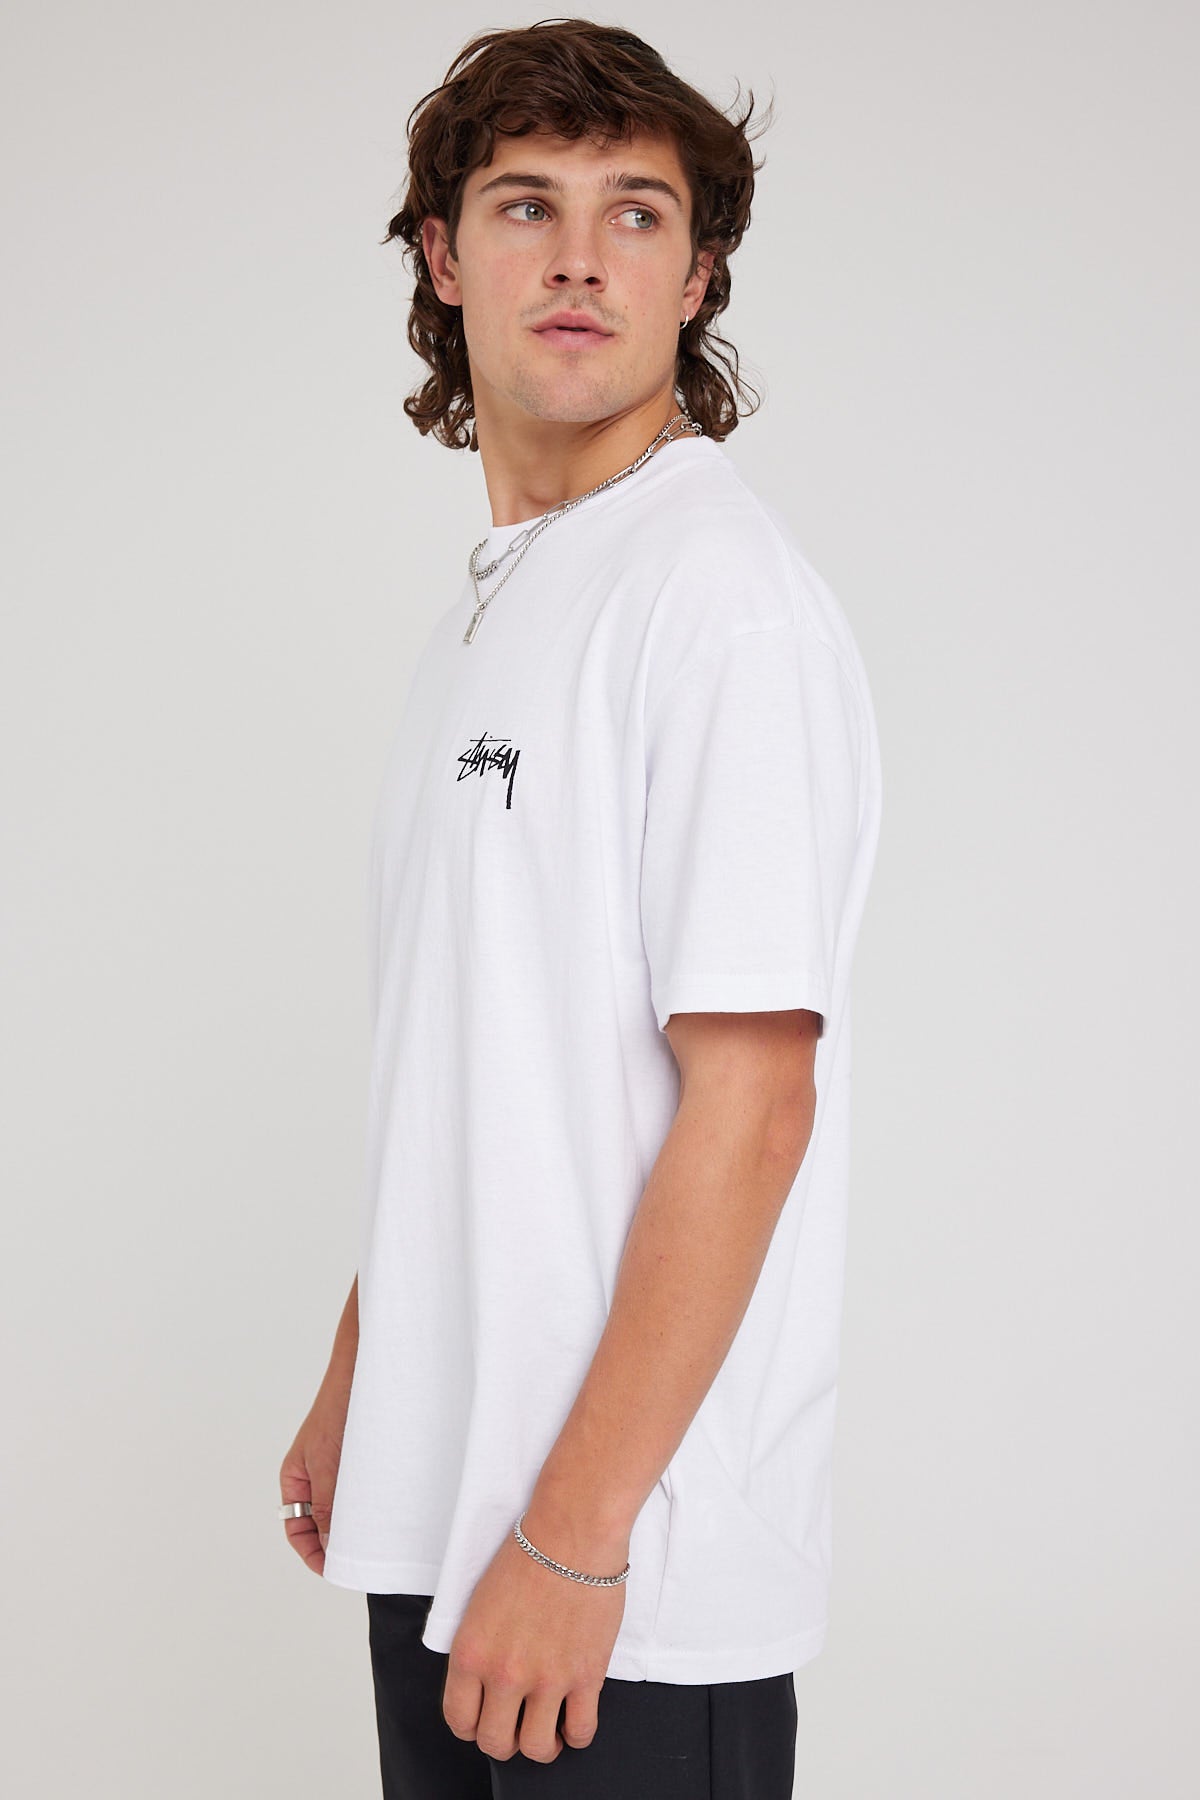 Stussy House Of Cards Tee White